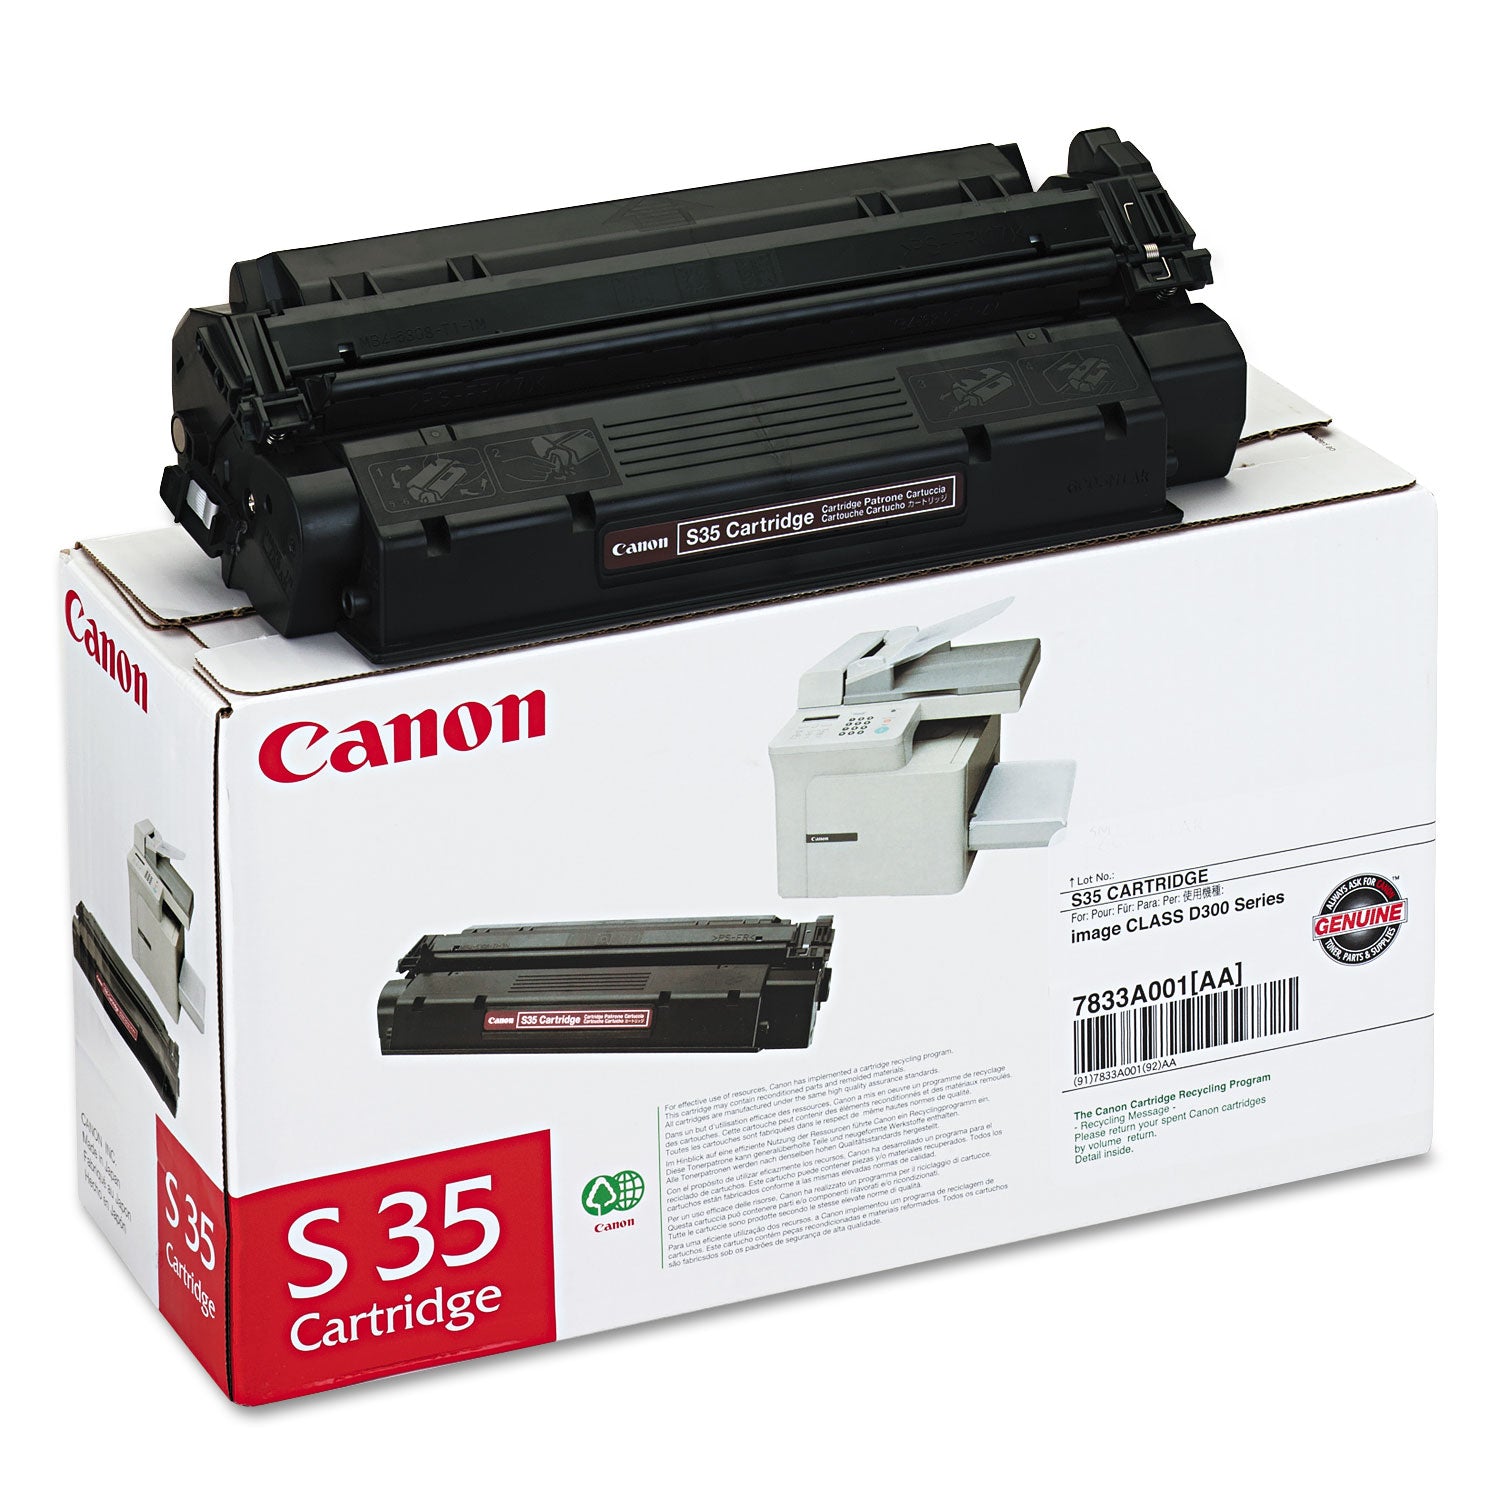 7833a001-s35-toner-3500-page-yield-black_cnm7833a001 - 1